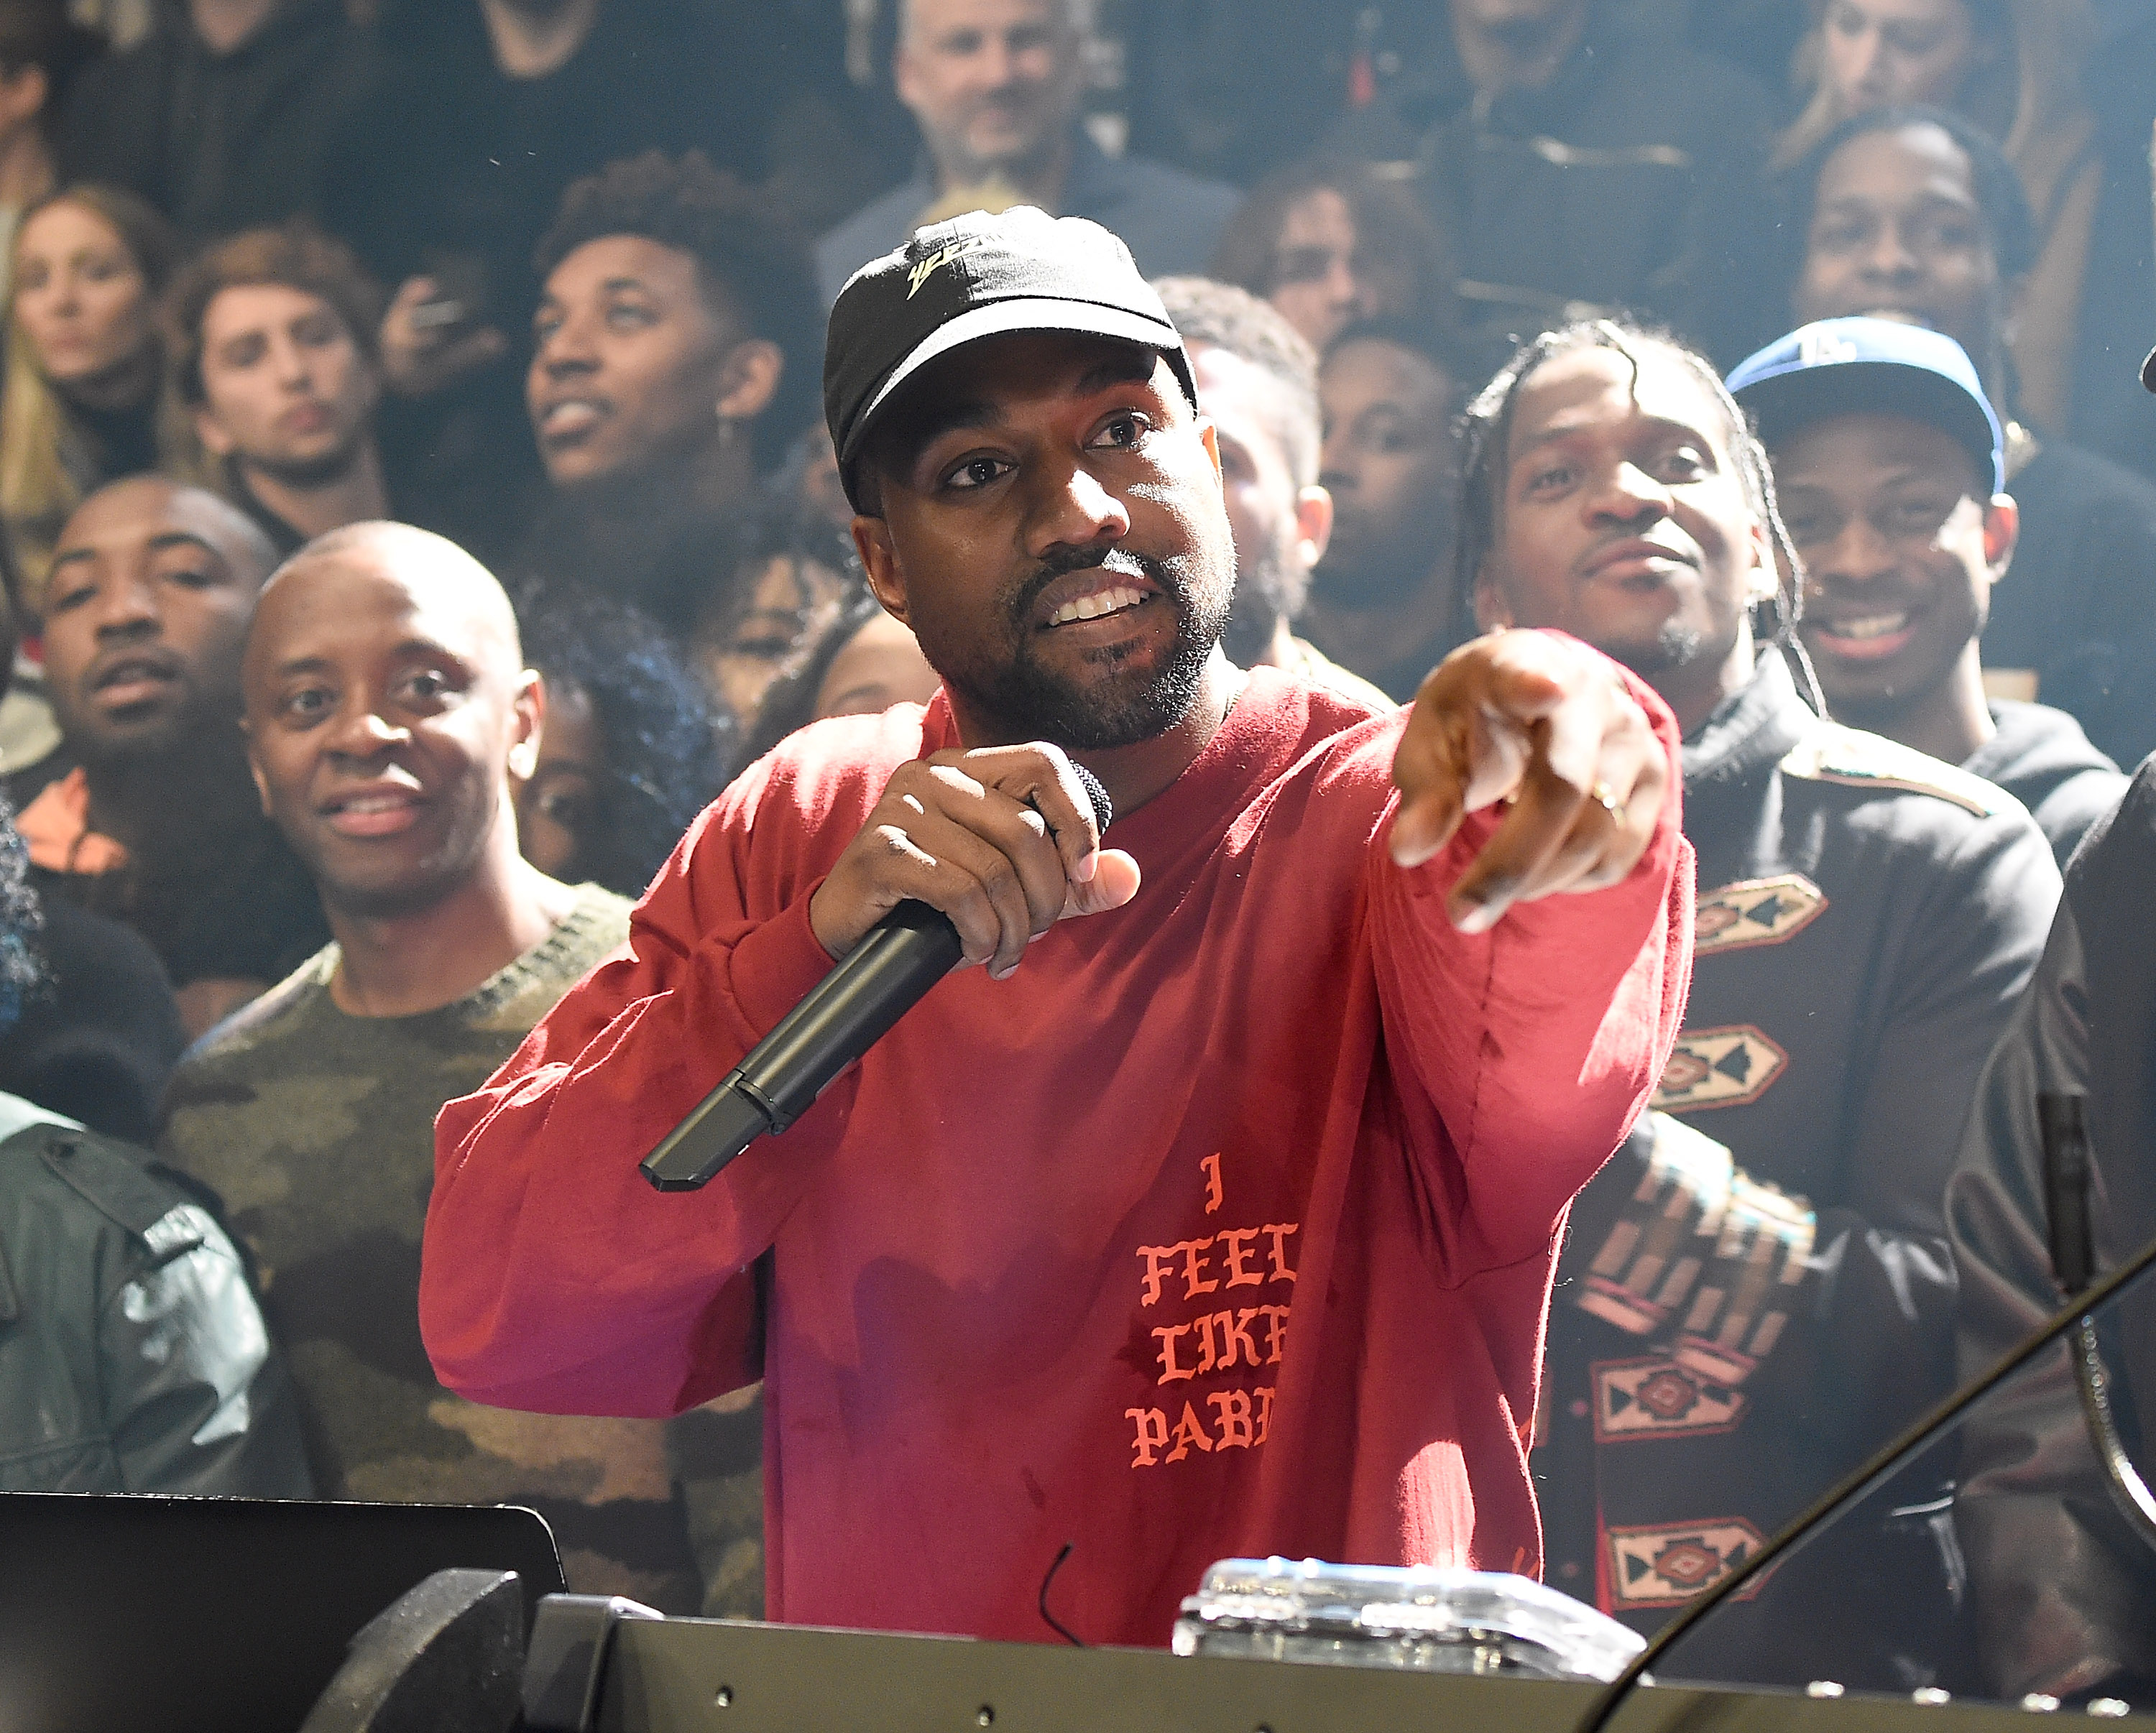 Kanye West attends Kanye West Yeezy Season 3 at Madison Square Garden on February 11, 2016 in New York City. (Kevin Mazur&mdash;Getty Images)